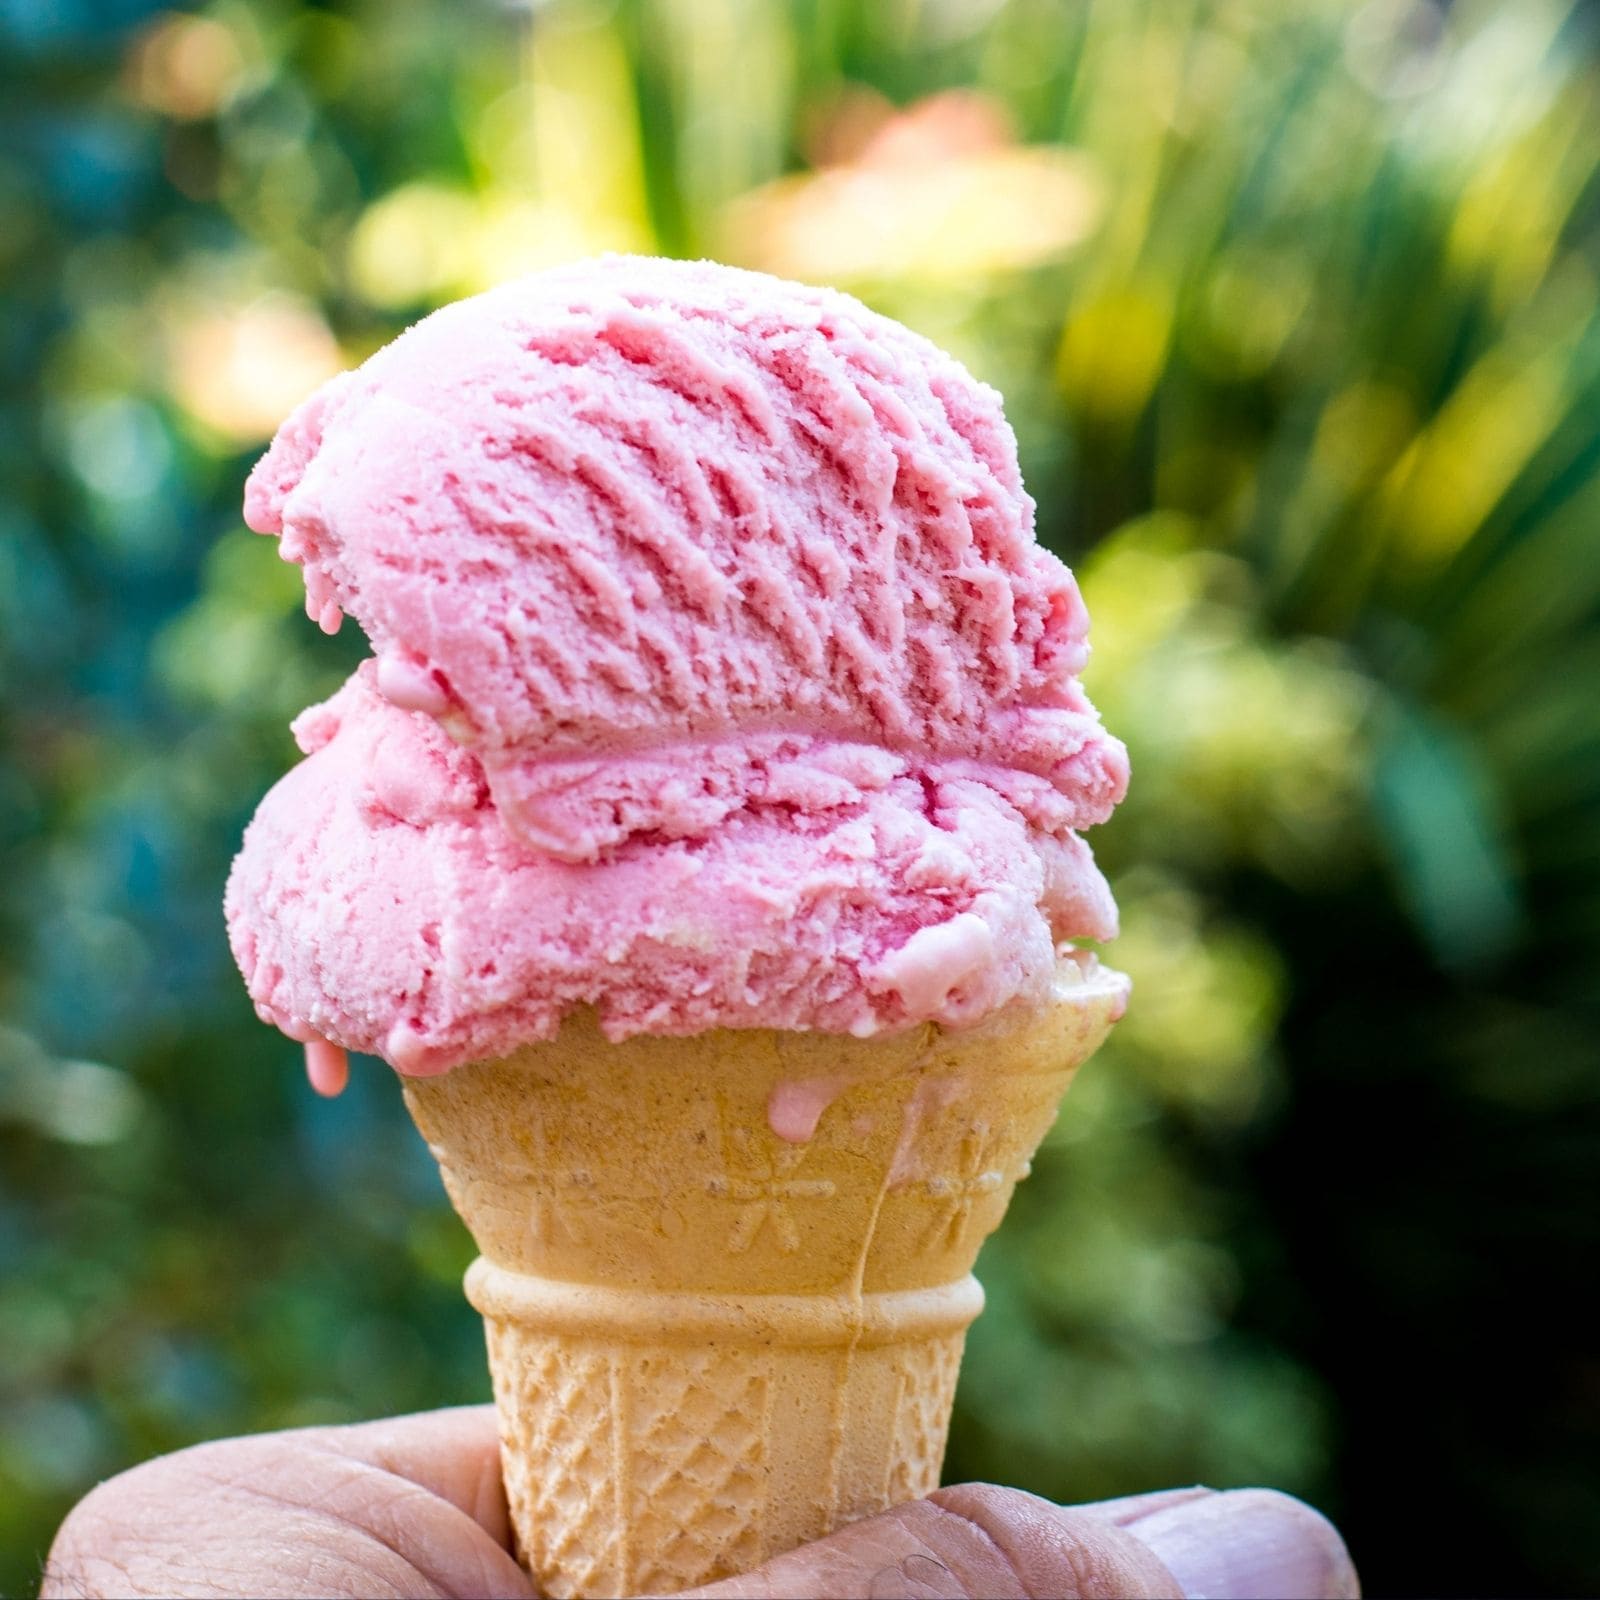 Summers Are Here: Industrial Ice Cream or Artisanal Ice Cream